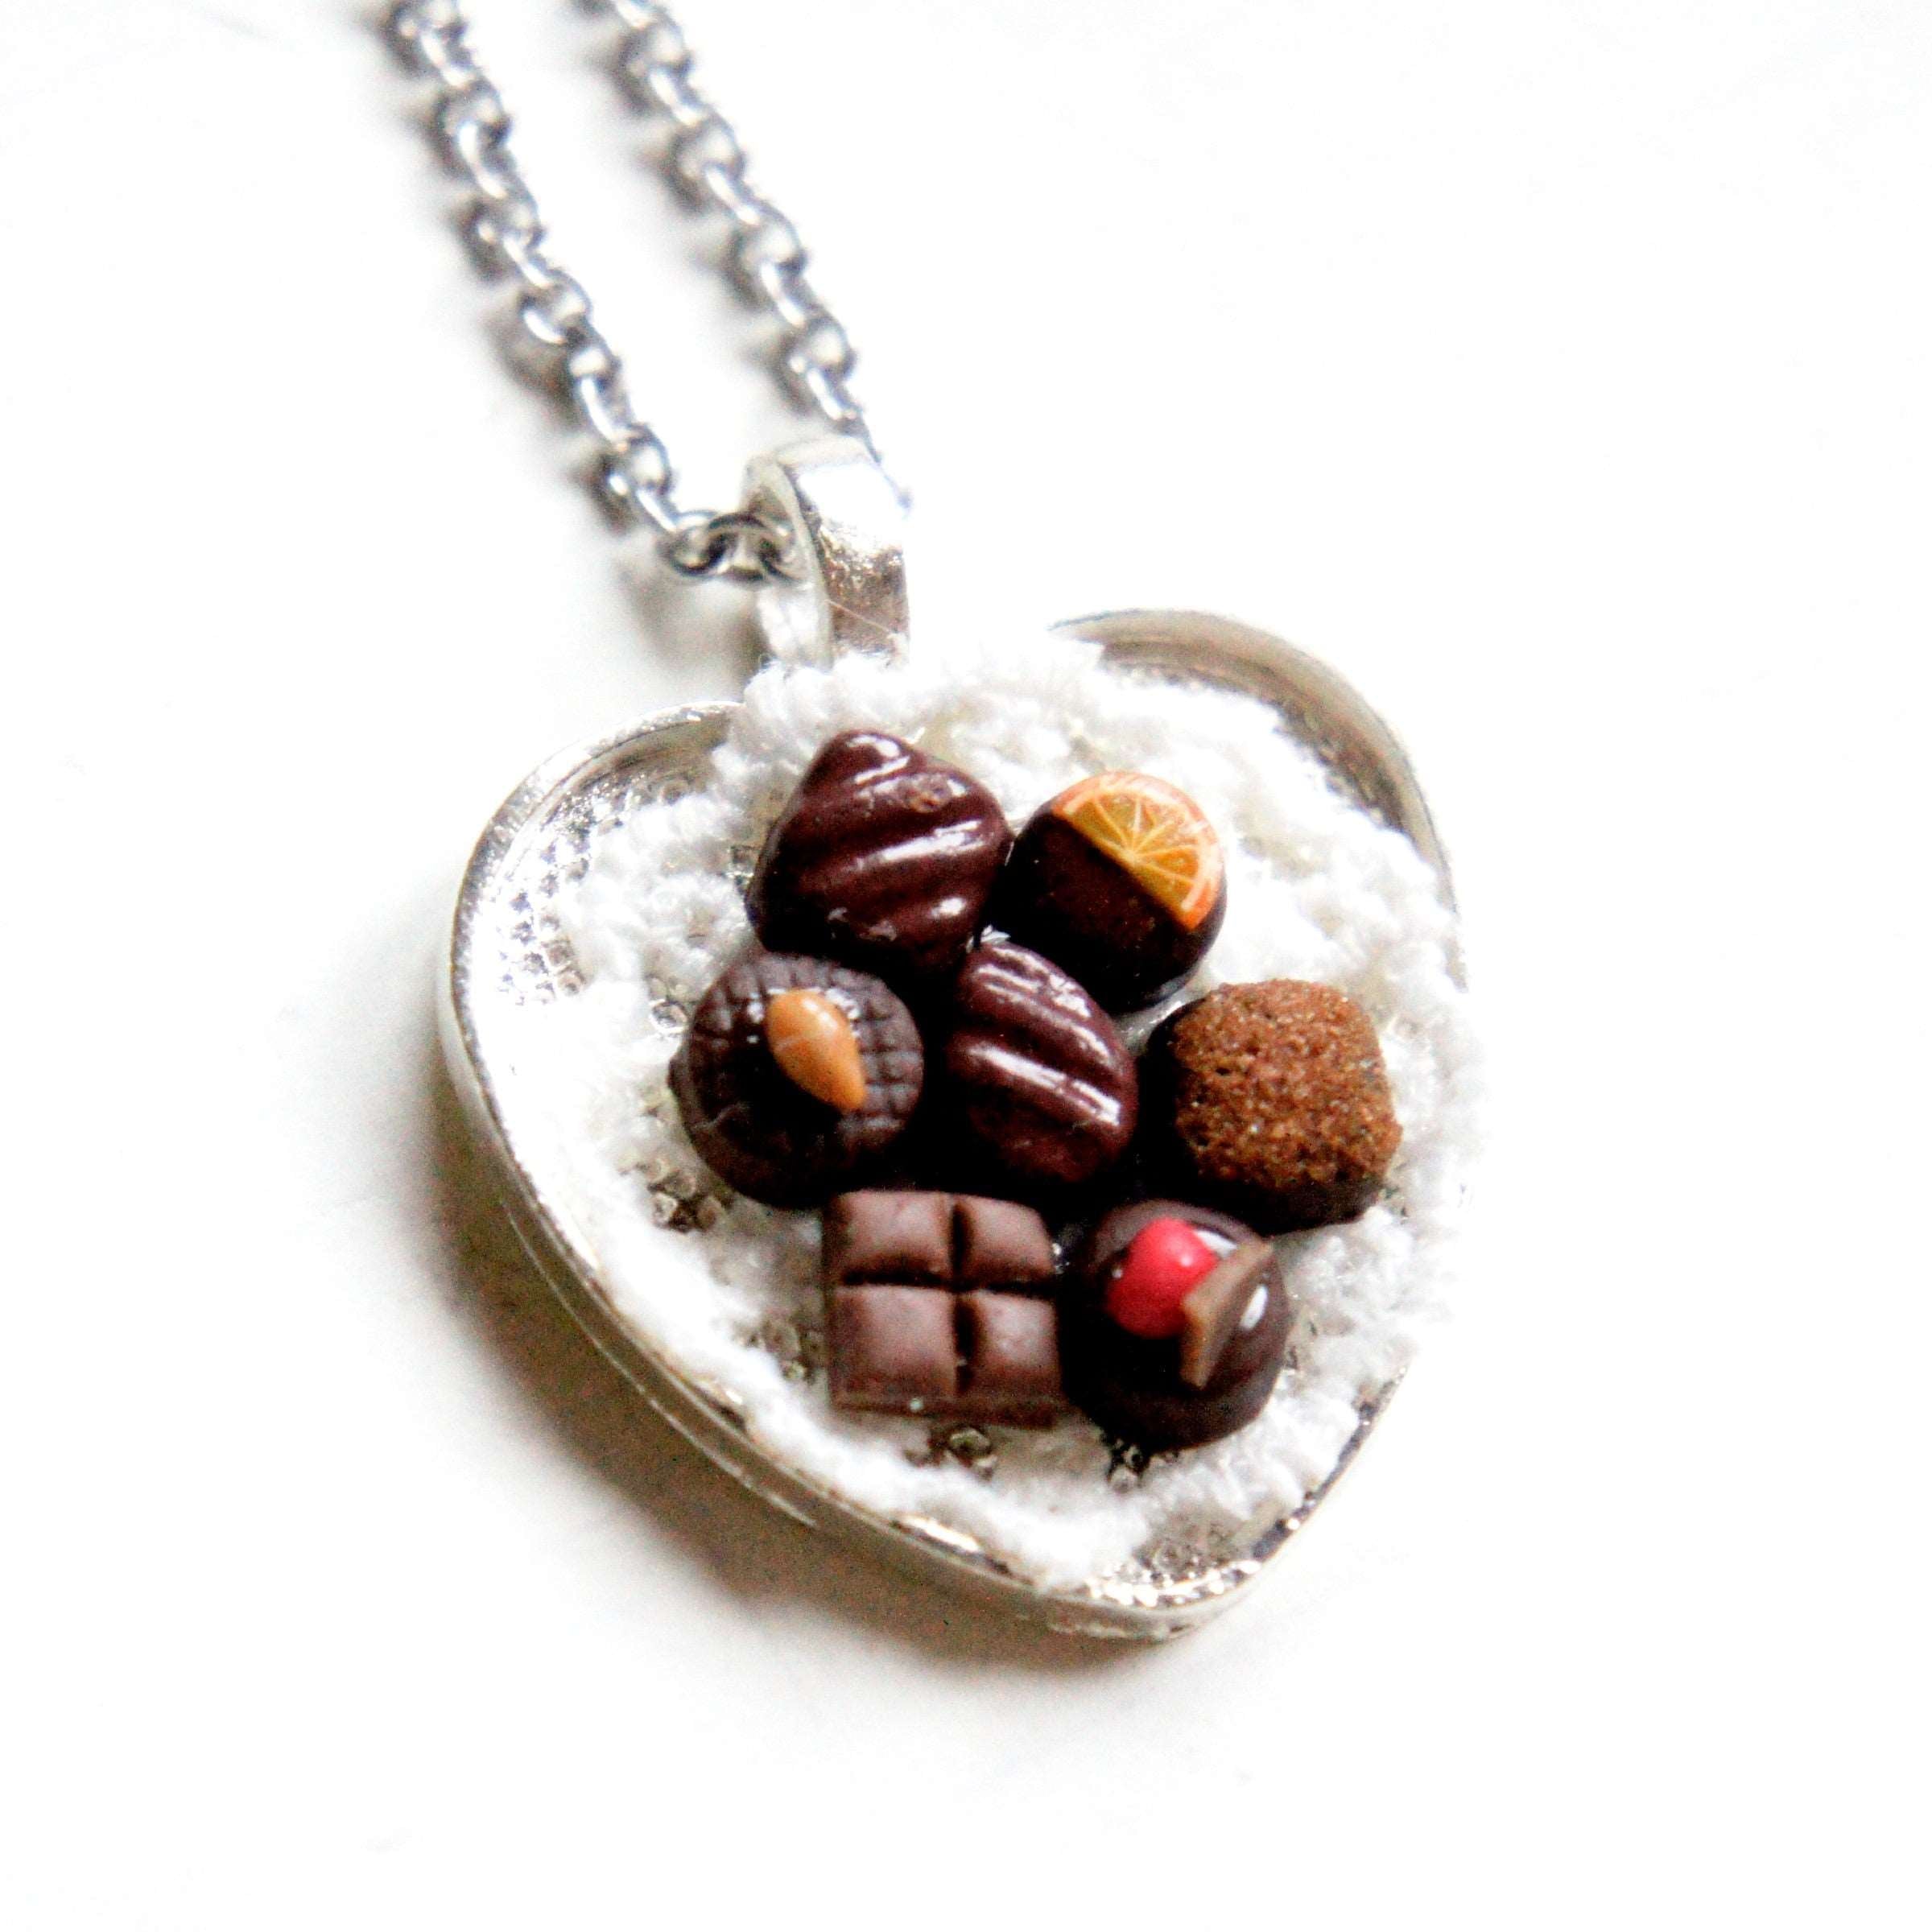 Chocolate Truffles Necklace - Jillicious charms and accessories